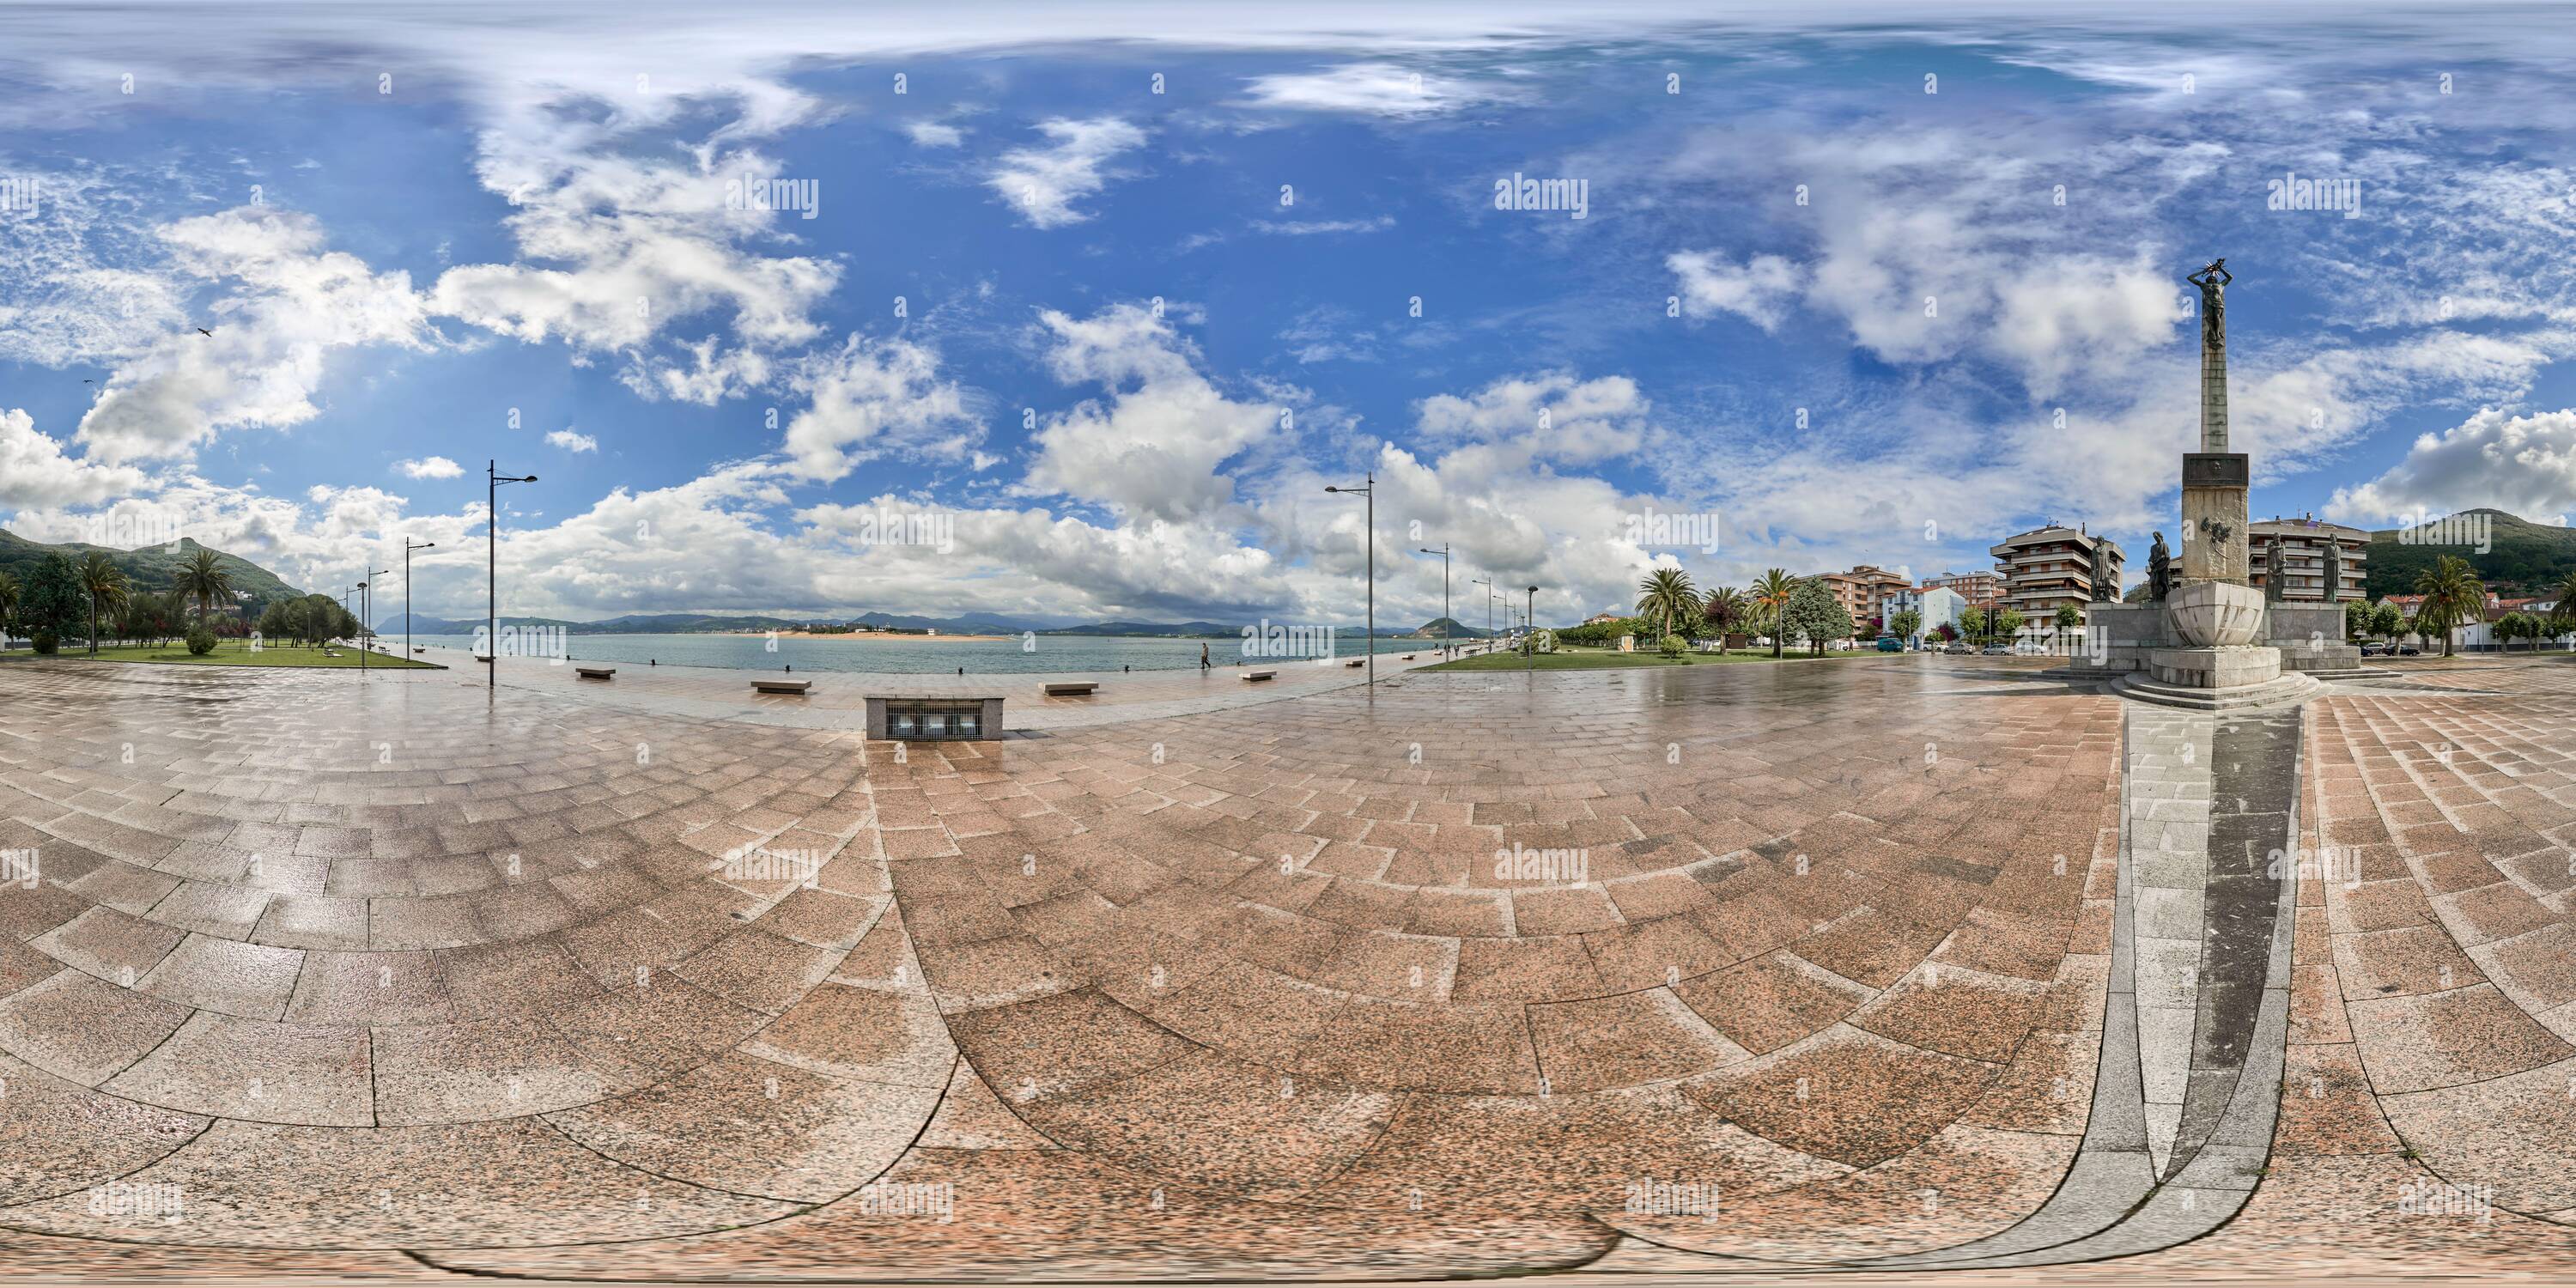 360 degree panoramic view of 360 Degree Panoramic: Monument to Luis Carrero Blanco antepenultimate president of the Franco government, El Pasaje promenade in Santoña, Cantabria.